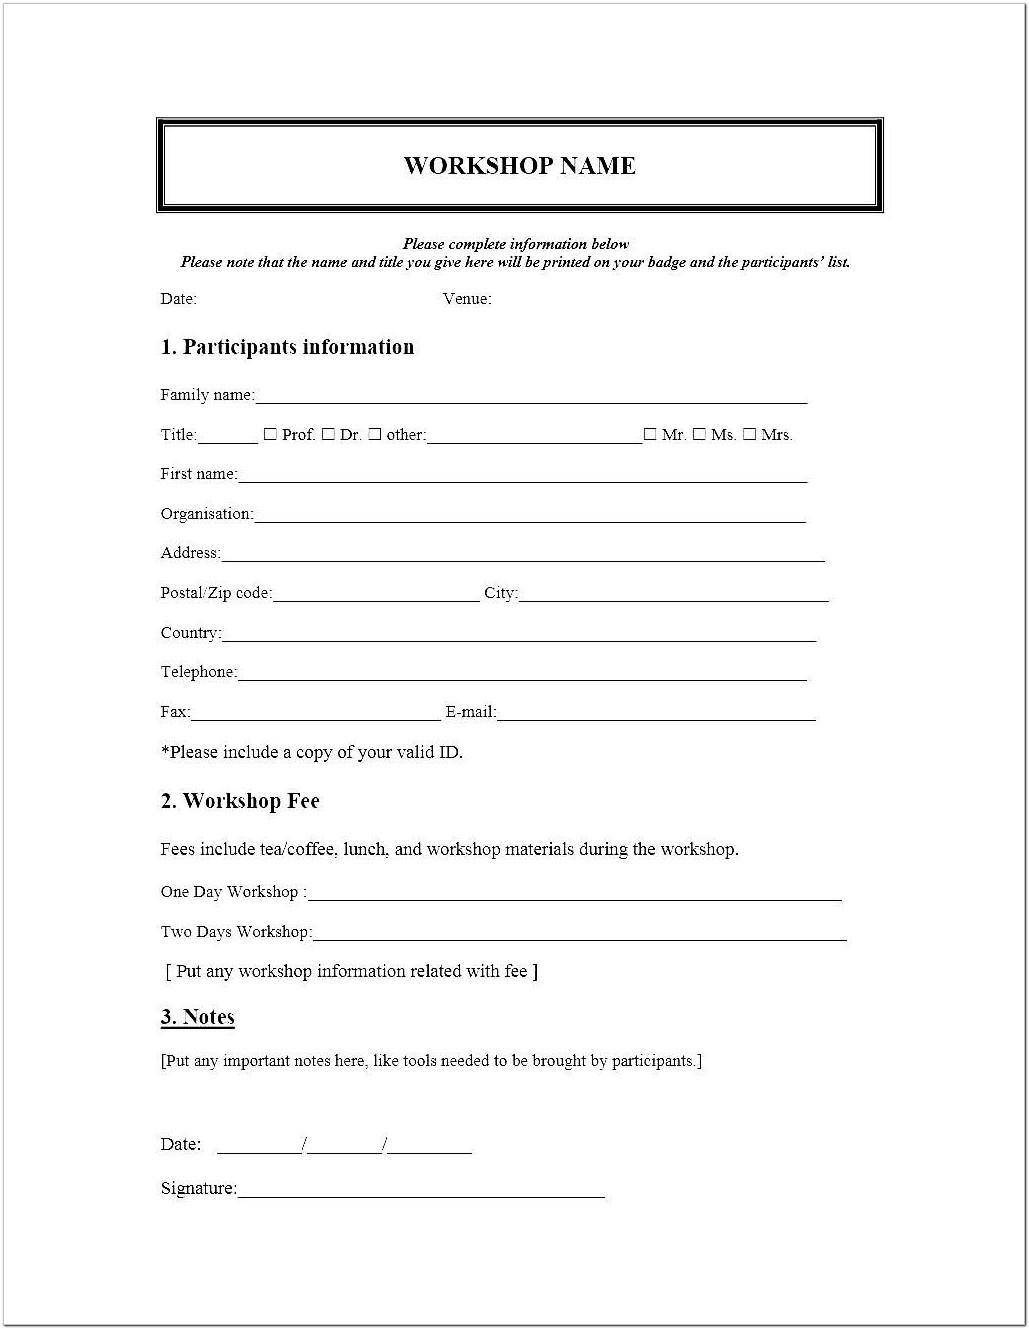 Application Form Template Microsoft Word